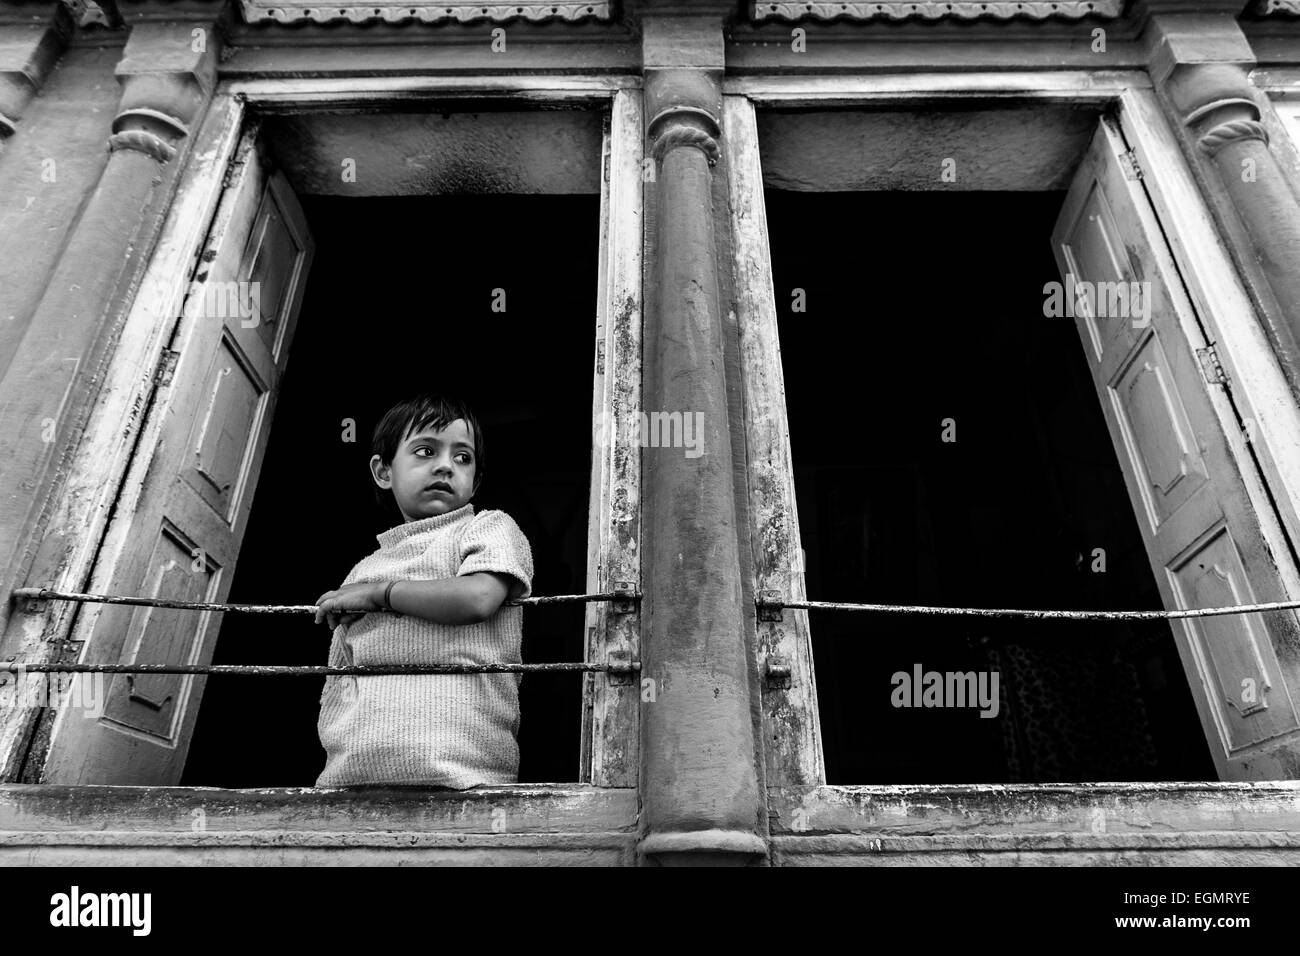 A Child Watches The World Go By From His House Overlooking The Street, Jodhpur, India Stock Photo